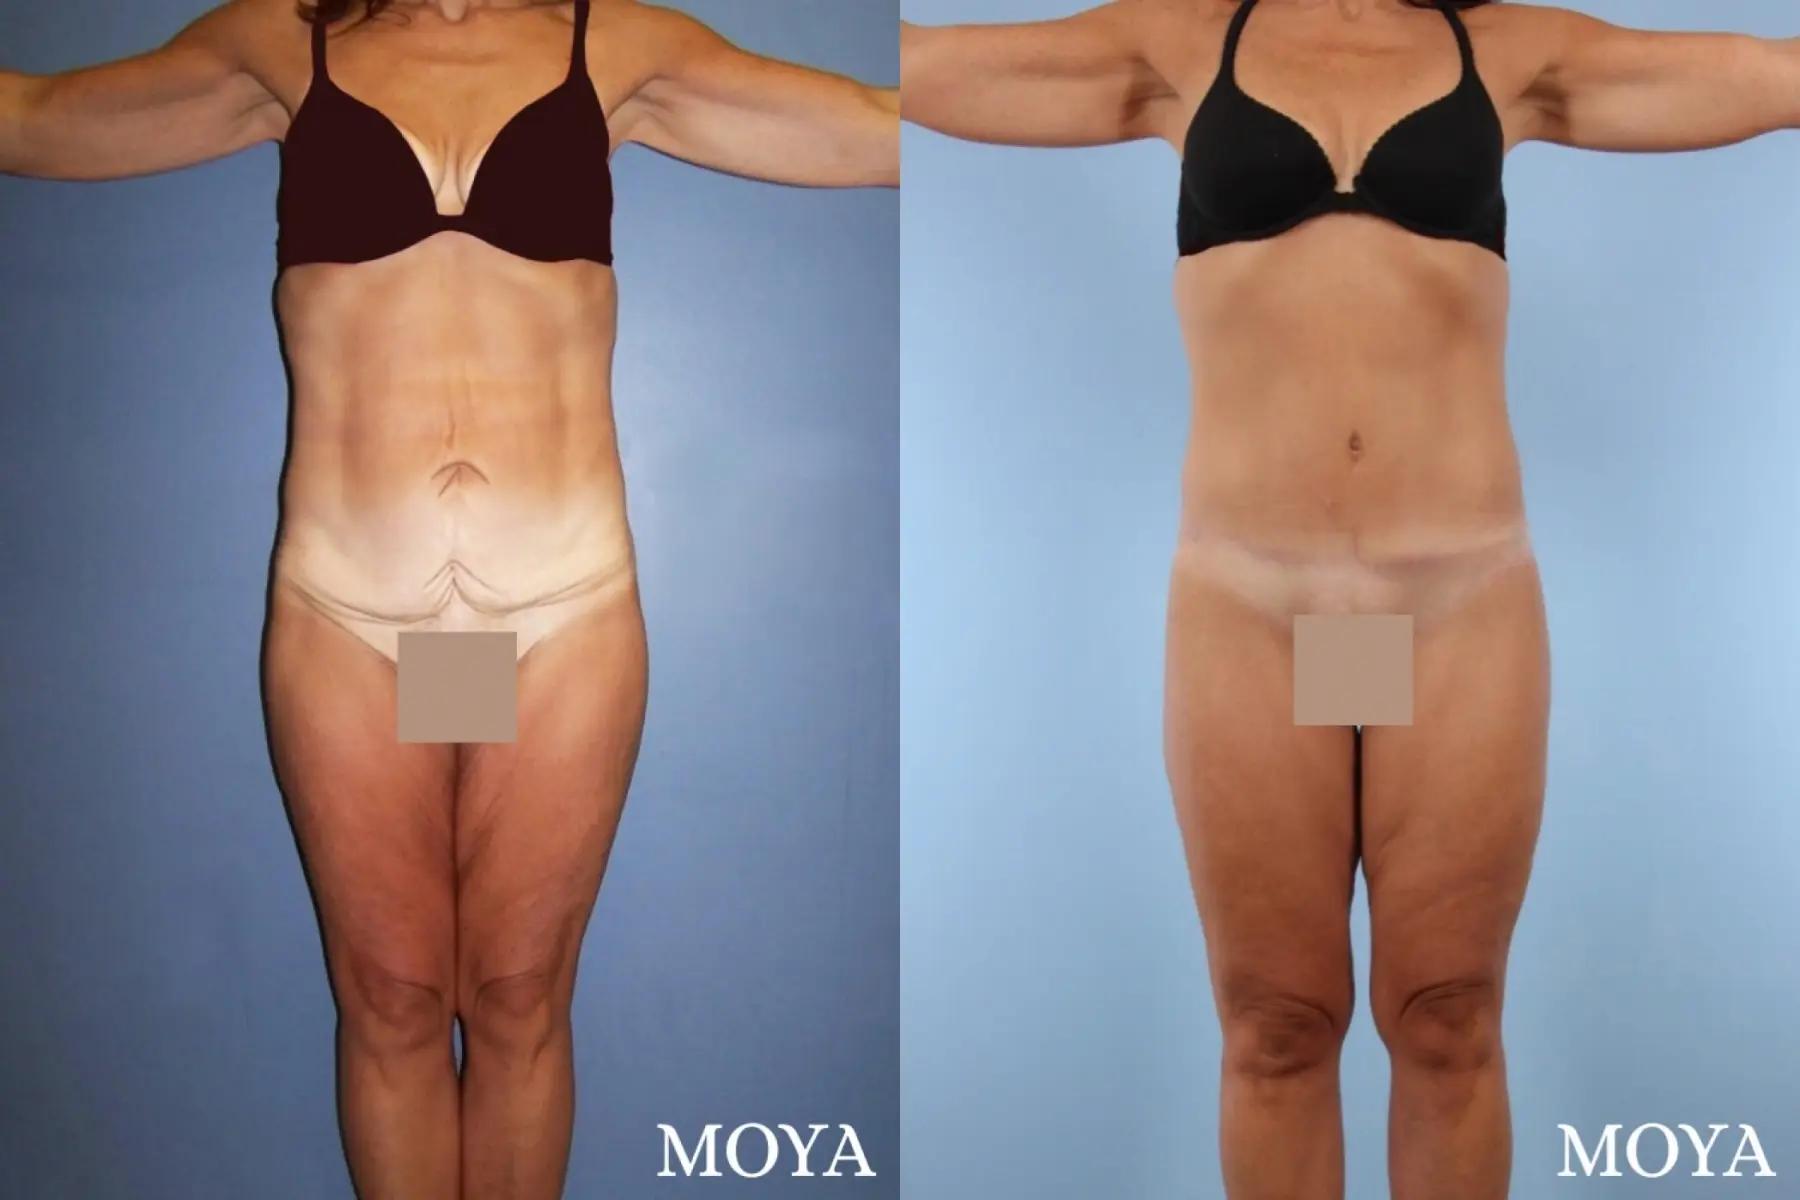 Lower Body Lift: Patient 1 - Before and After 1